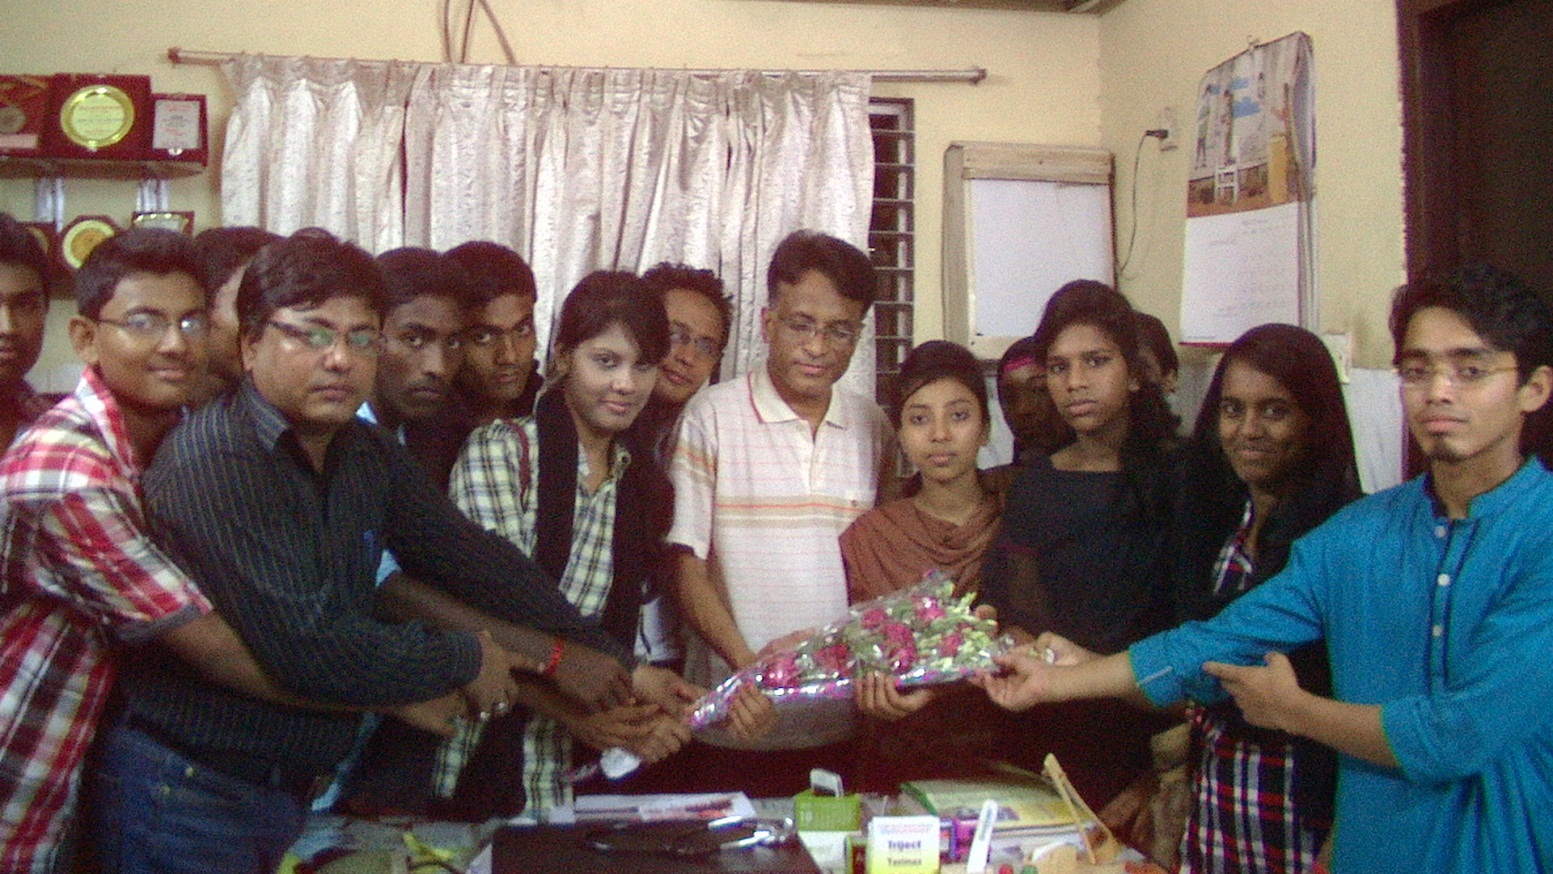 In the Pictrue- Chairman of Begamganj-Sonaimuri Shikkha O Sastha Unnayan Foundation and Begumganj Technical and Computer Institute Principal Gias Uddin Mithu and students greet with flowers Dr. Abu Taher, the advisor of the Institute